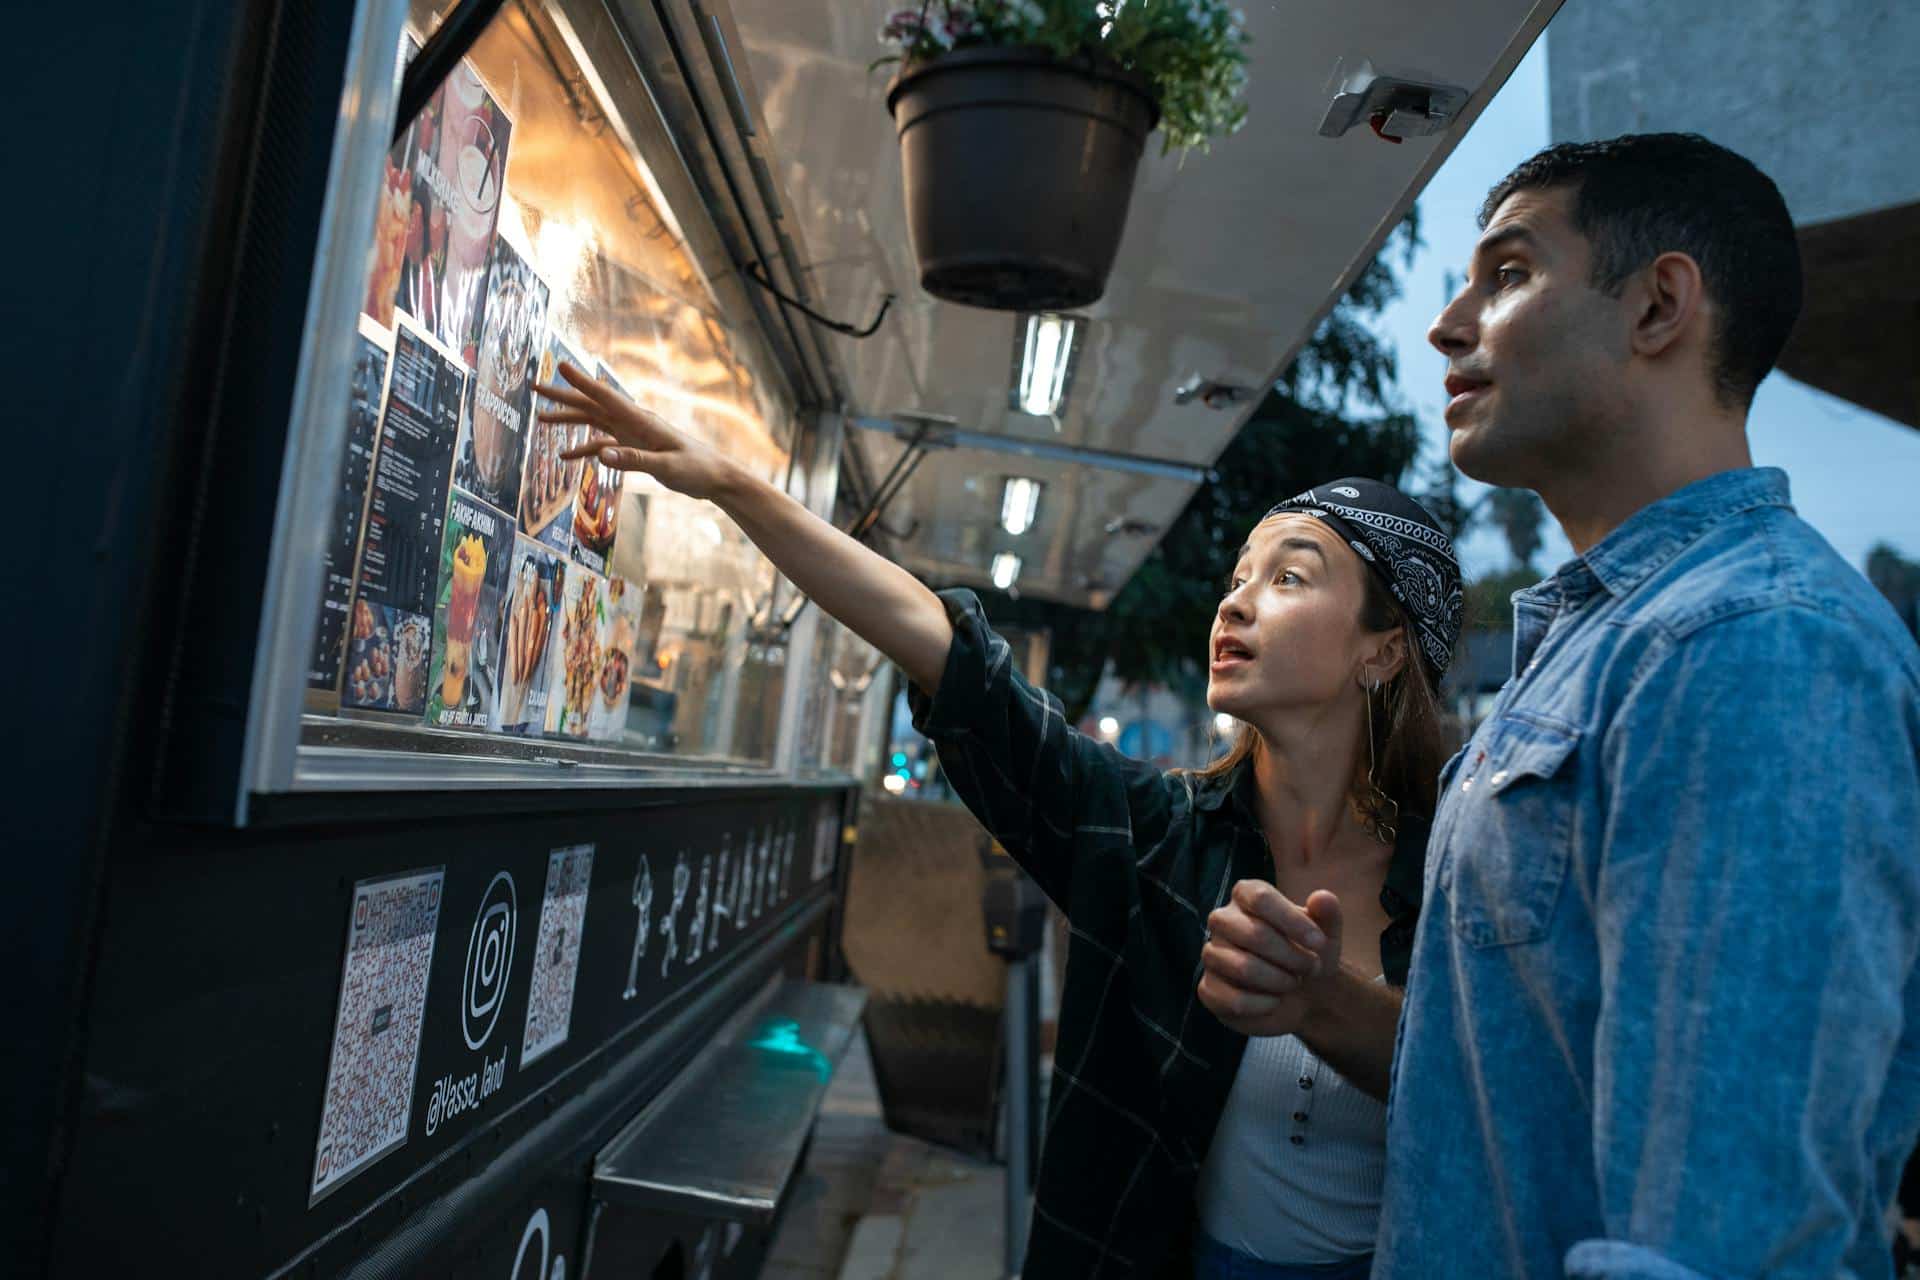 Man and woman discuss food truck's menu in the twilight.